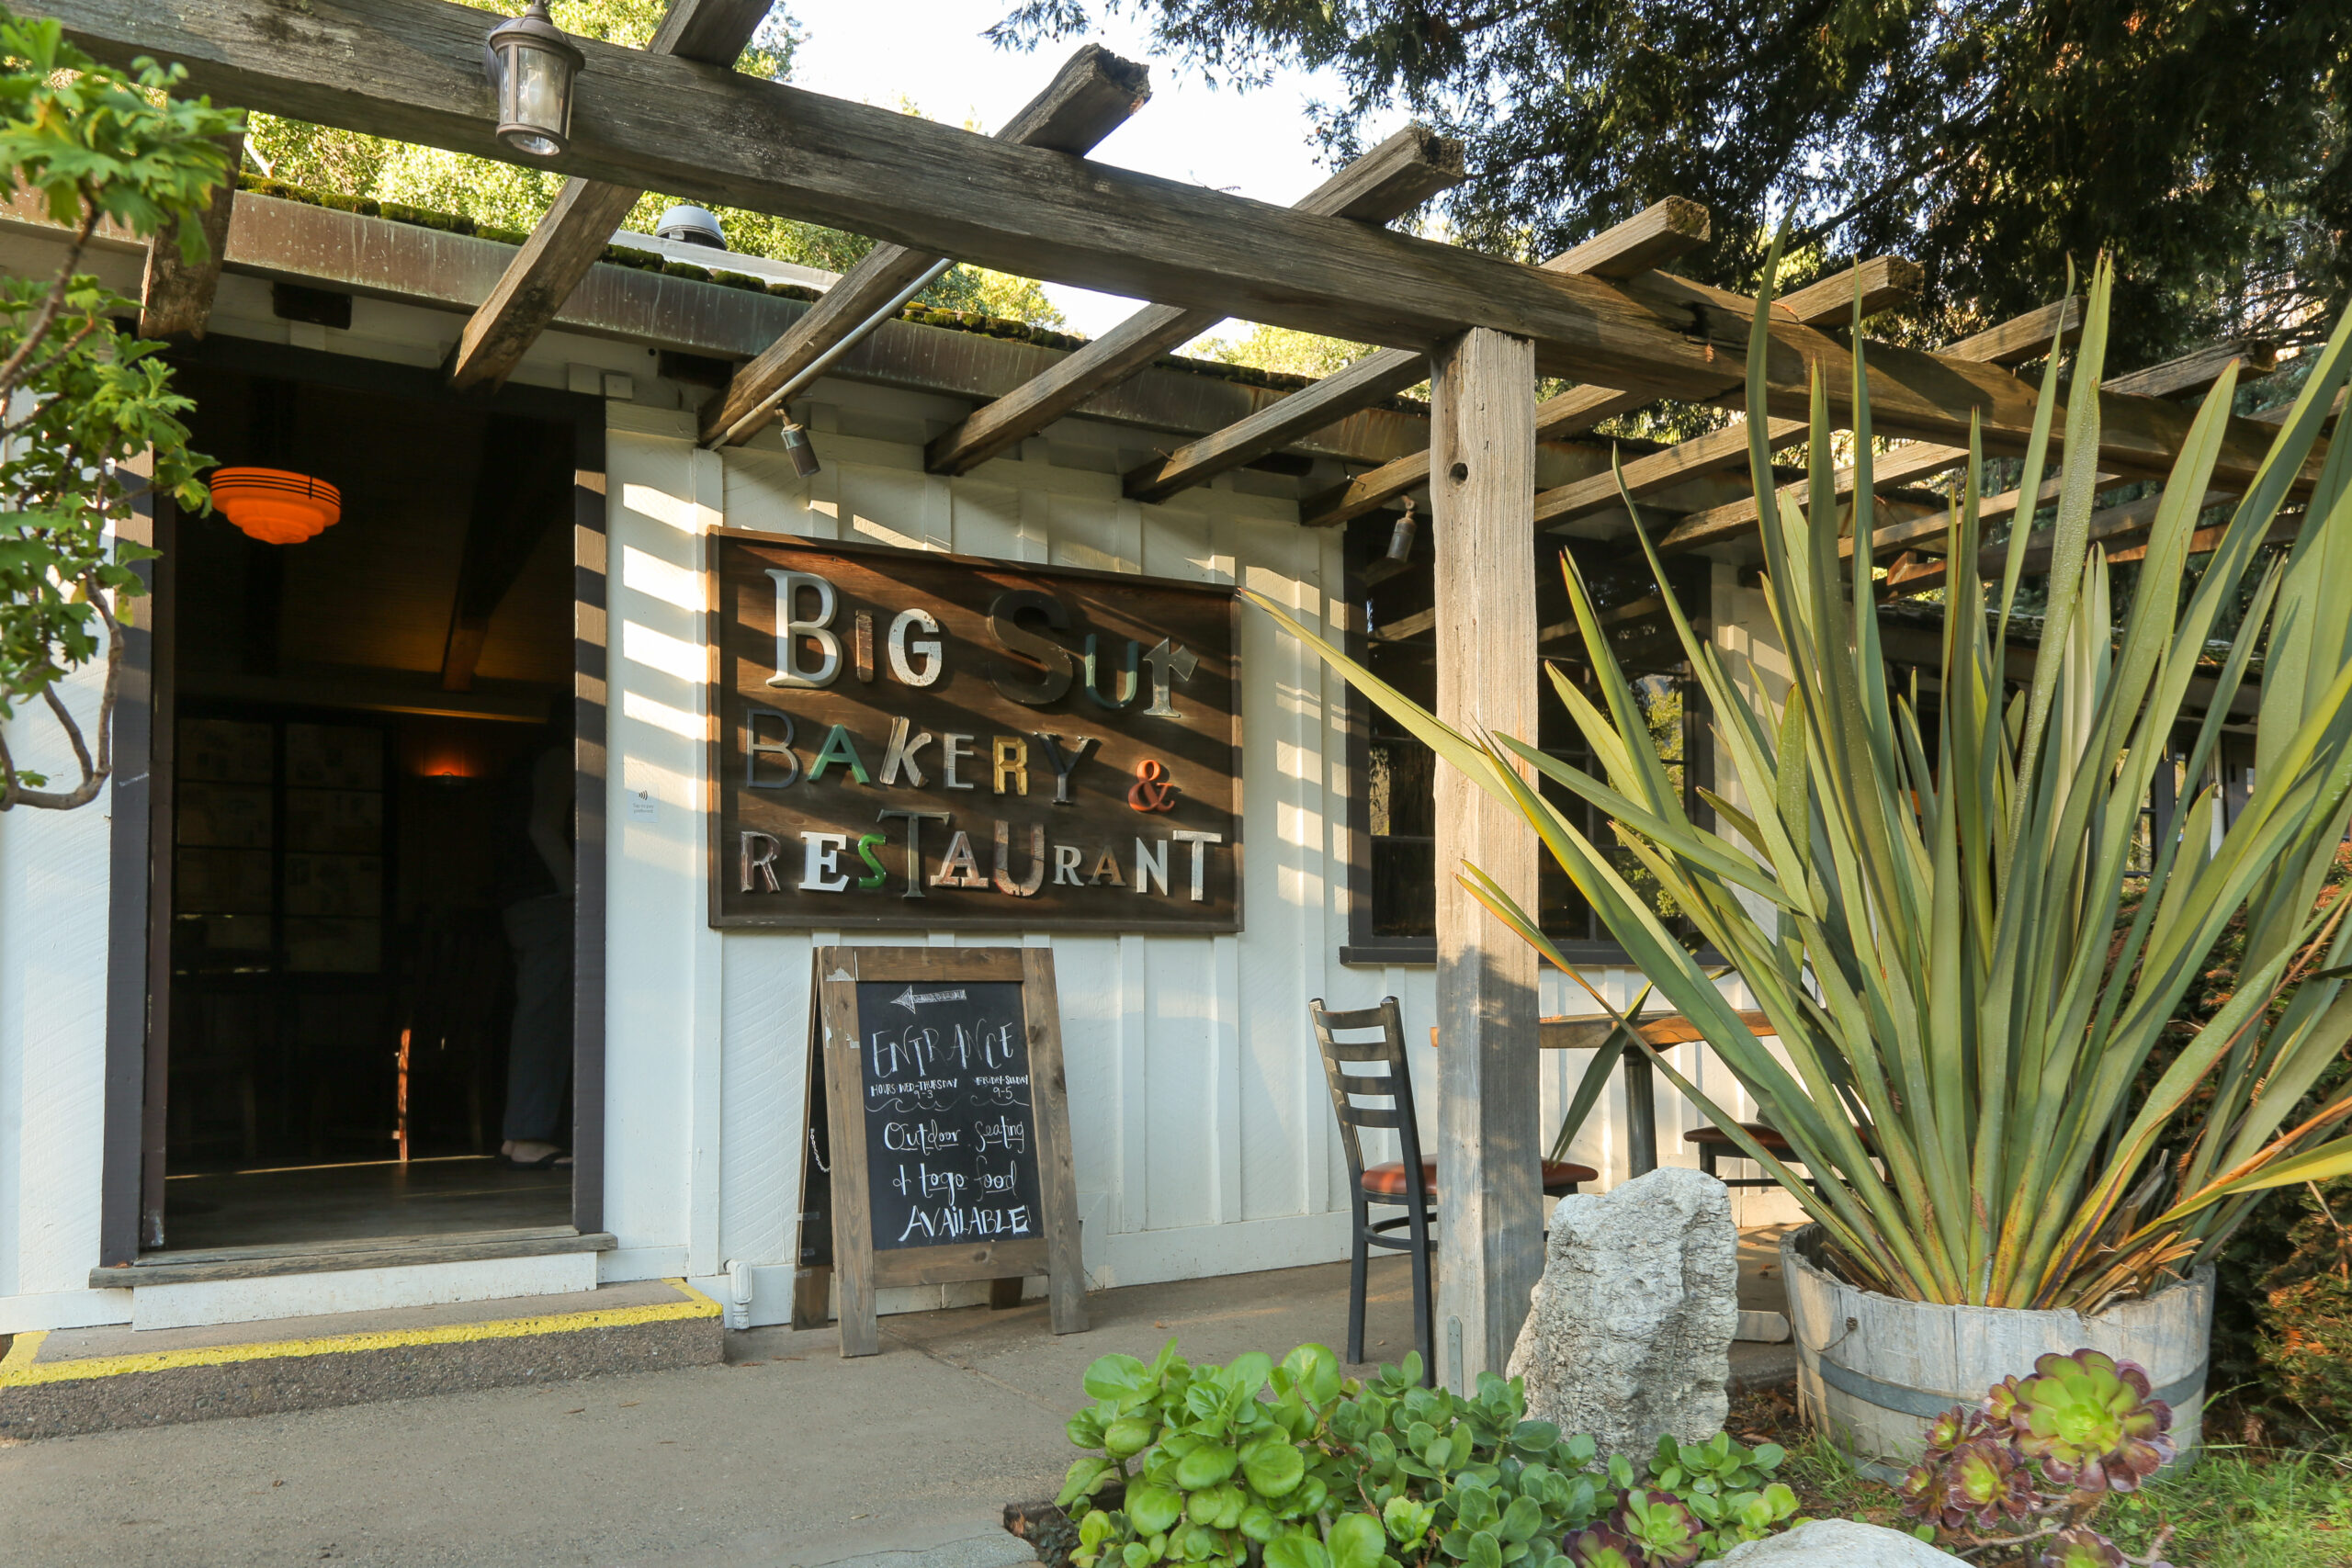 Exterior of Big Sur Bakery including the sign and outdoor seating area.